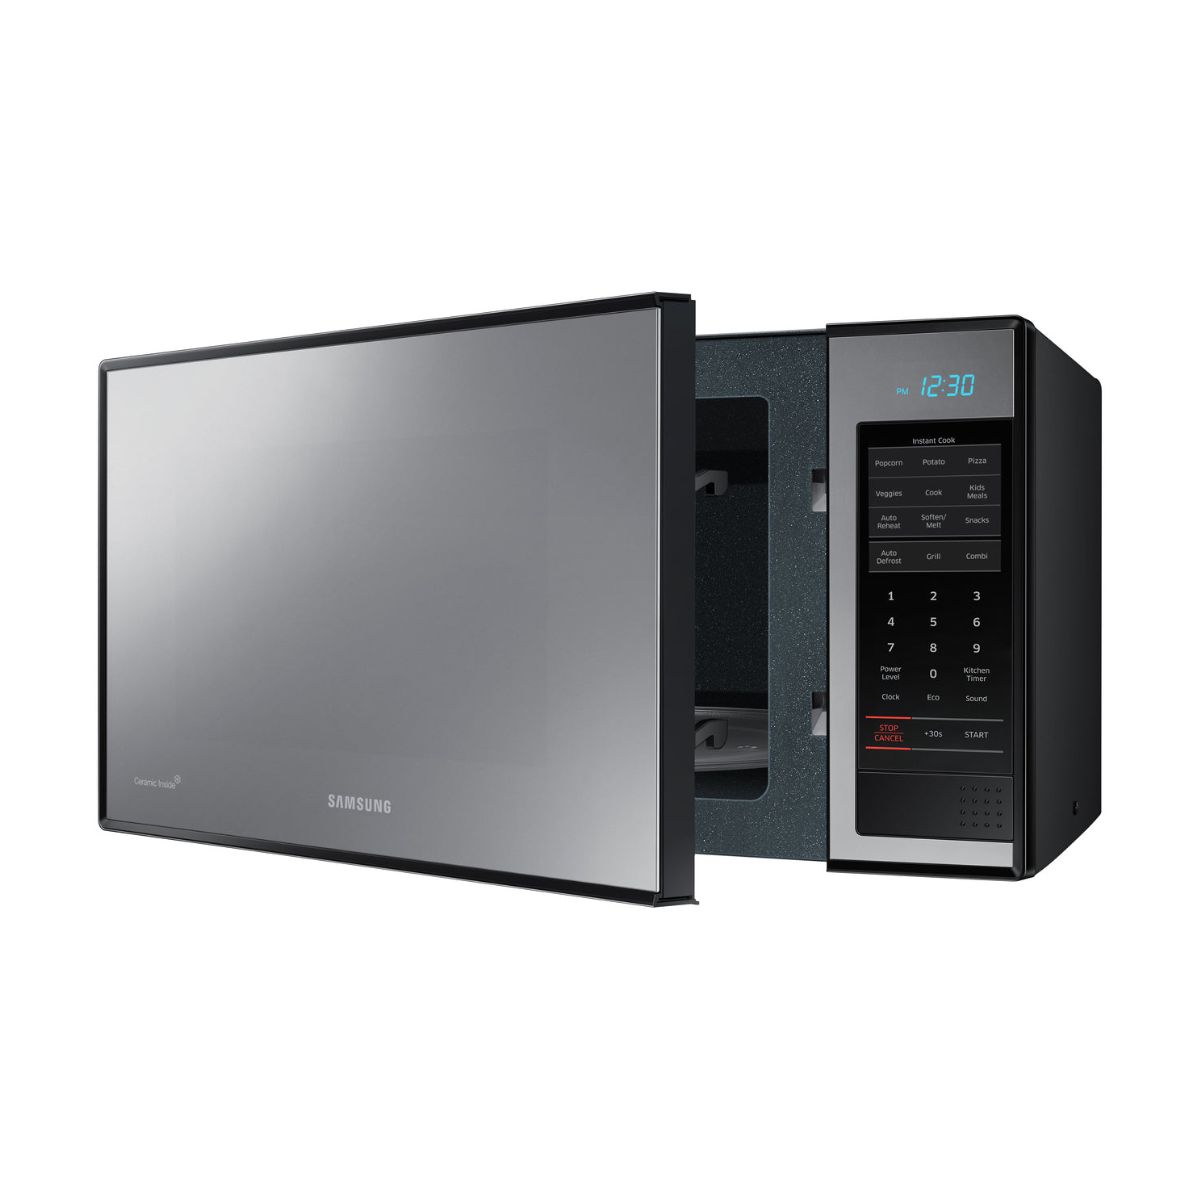 How To Fix The Error Code E-H3 For Samsung Microwave